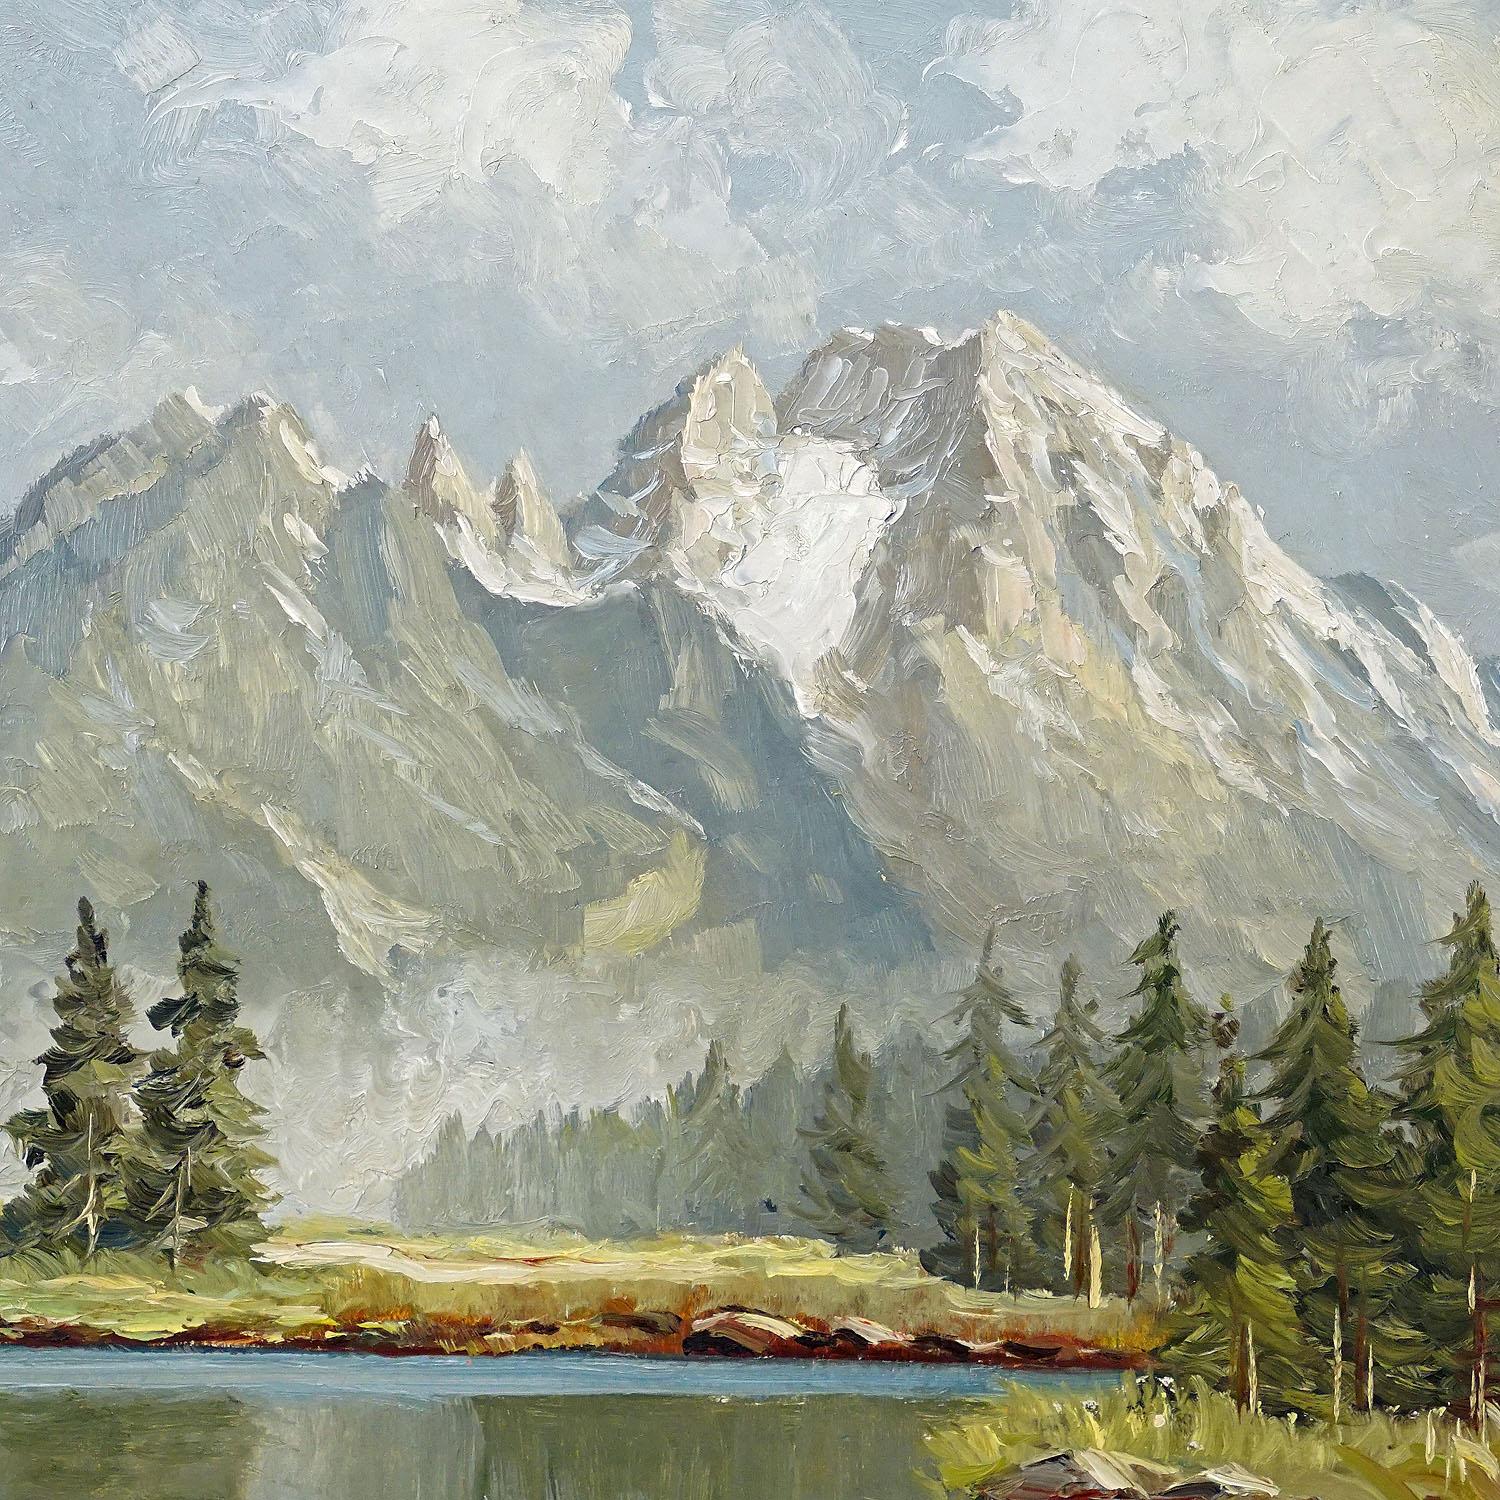 Painted W. Kruegner, Summerly High Mountain Landscape with Alpine Lake and Watzmann For Sale